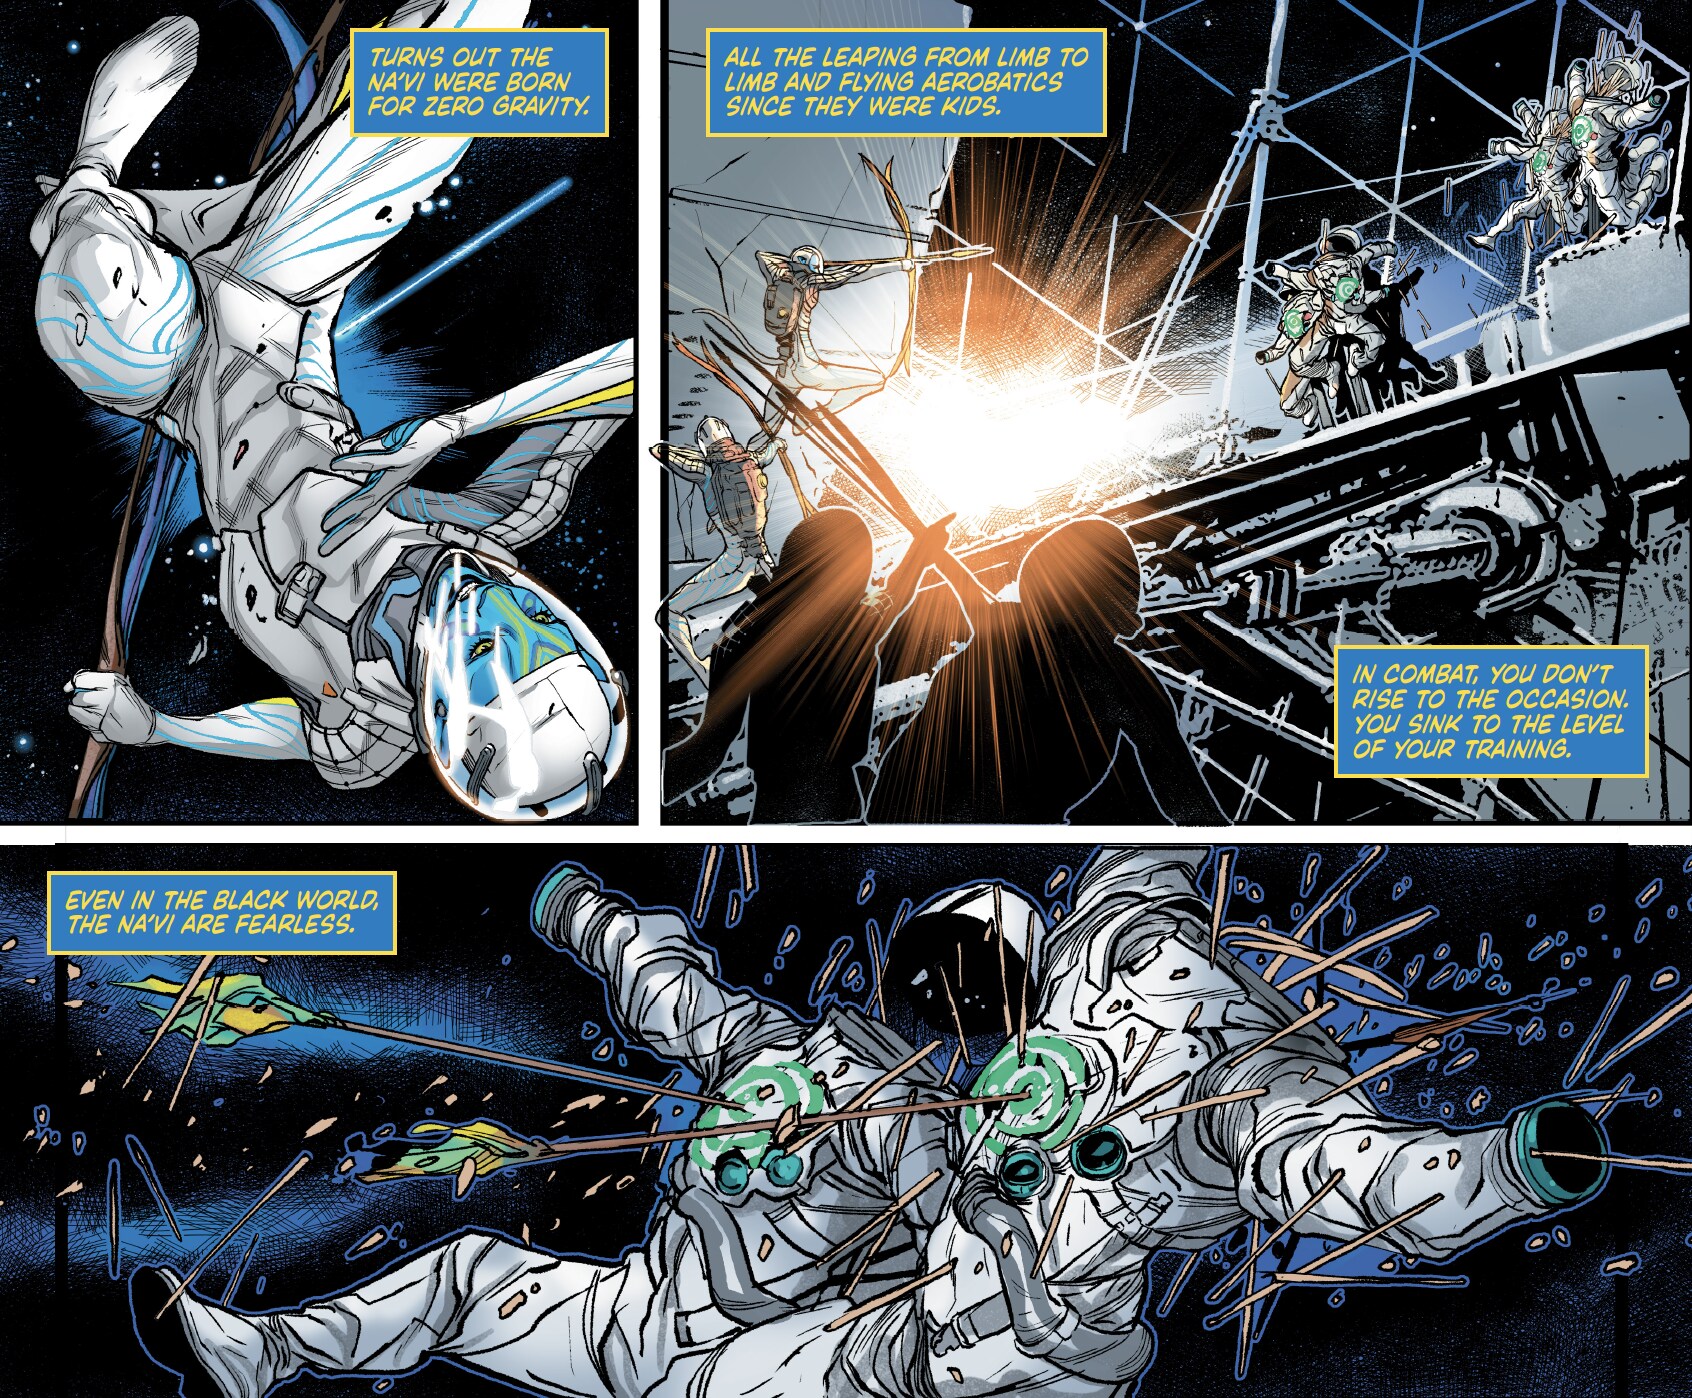 Comic book renditions of Na'vi in space suits.